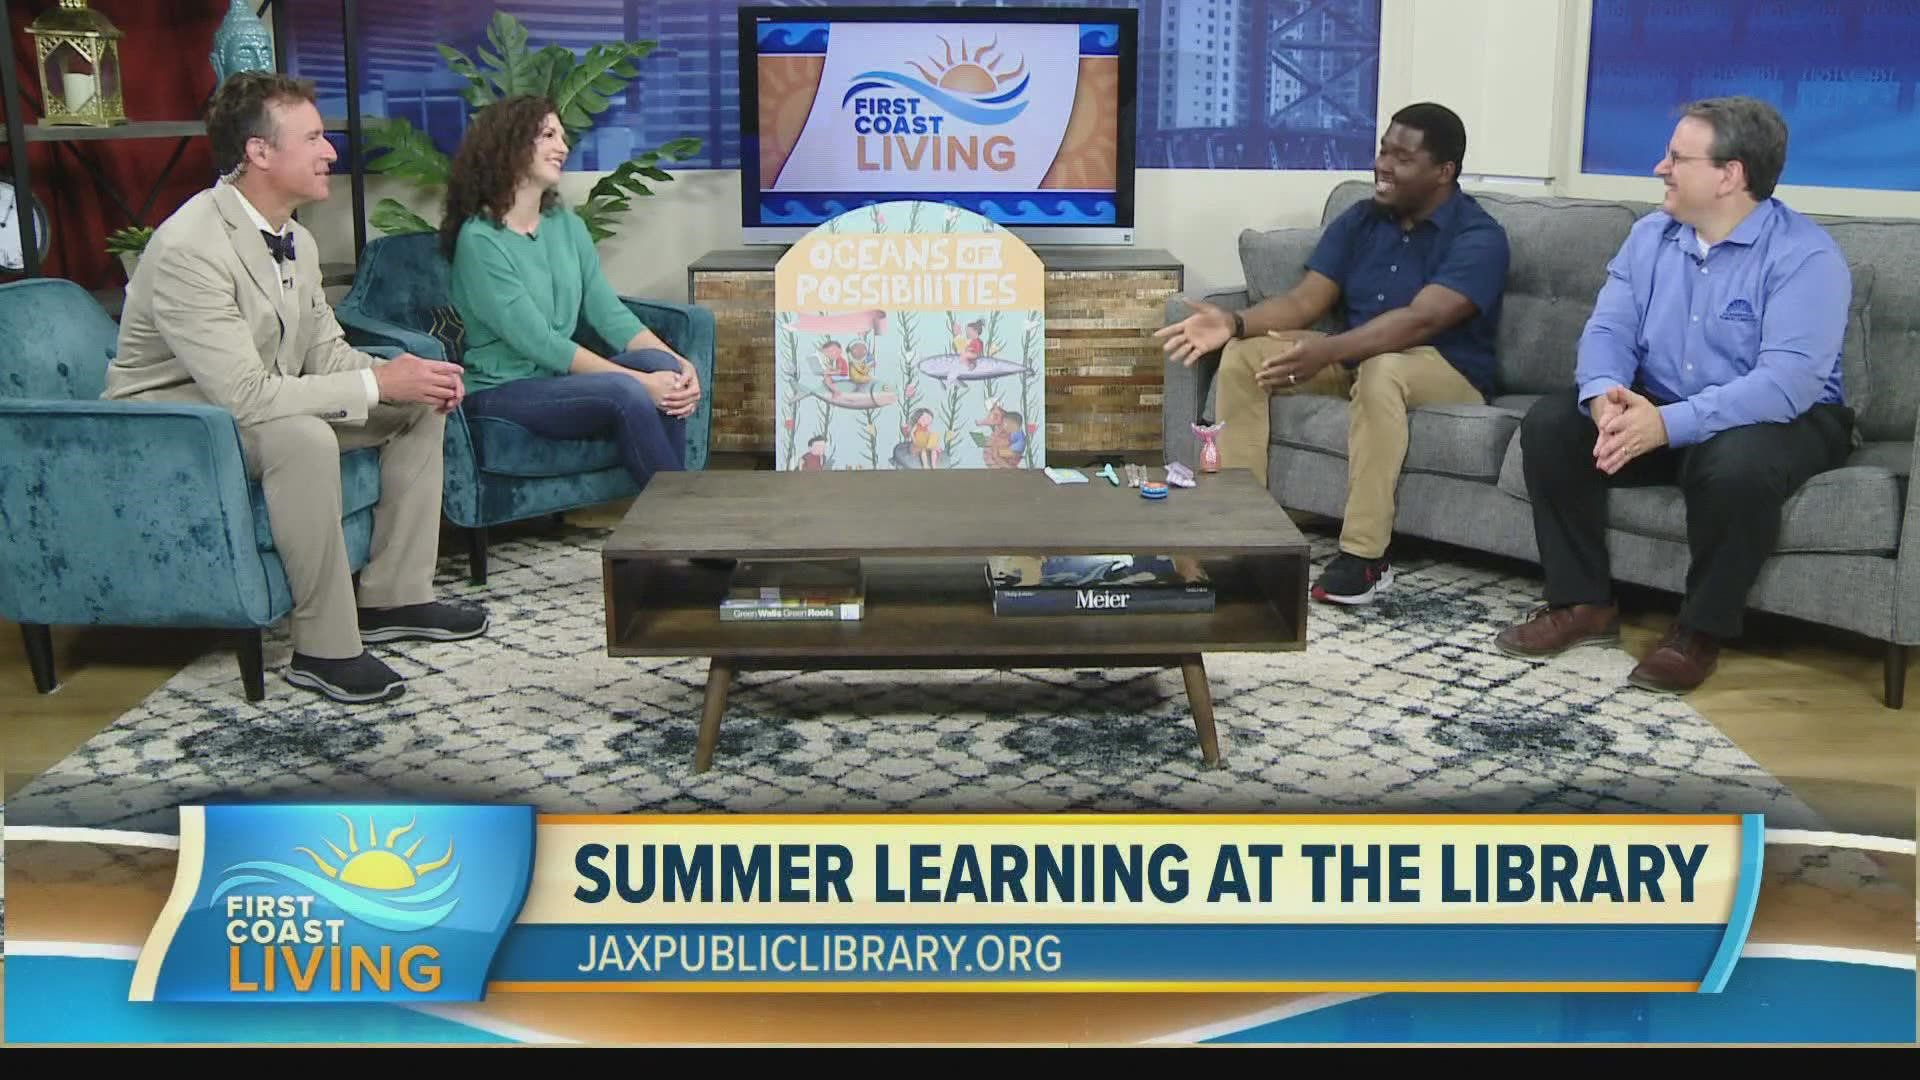 Keep your child's mind active this summer! The Jacksonville Public Library has great incentives for reading and learning.